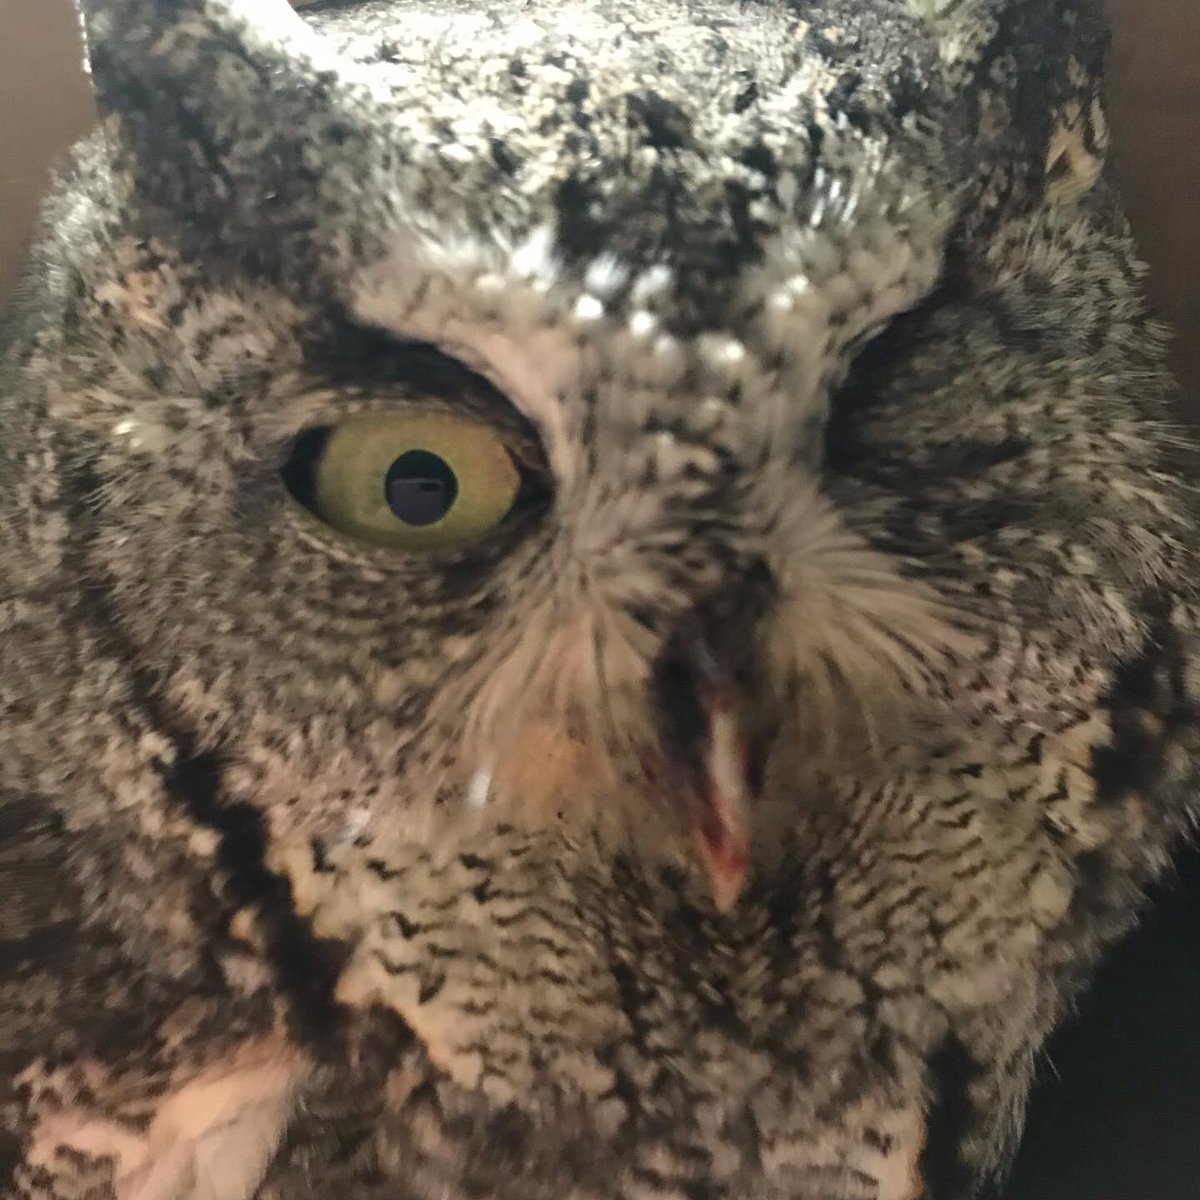 They say things come in 3s! This is the third Eastern Screech owl this week. This one in particular has a cut on the eyelid, but is lucky the eye itself is unharmed.
#wildlife #wildliferehab #raptorrehabilitation #easternscreechowl #cuteowls